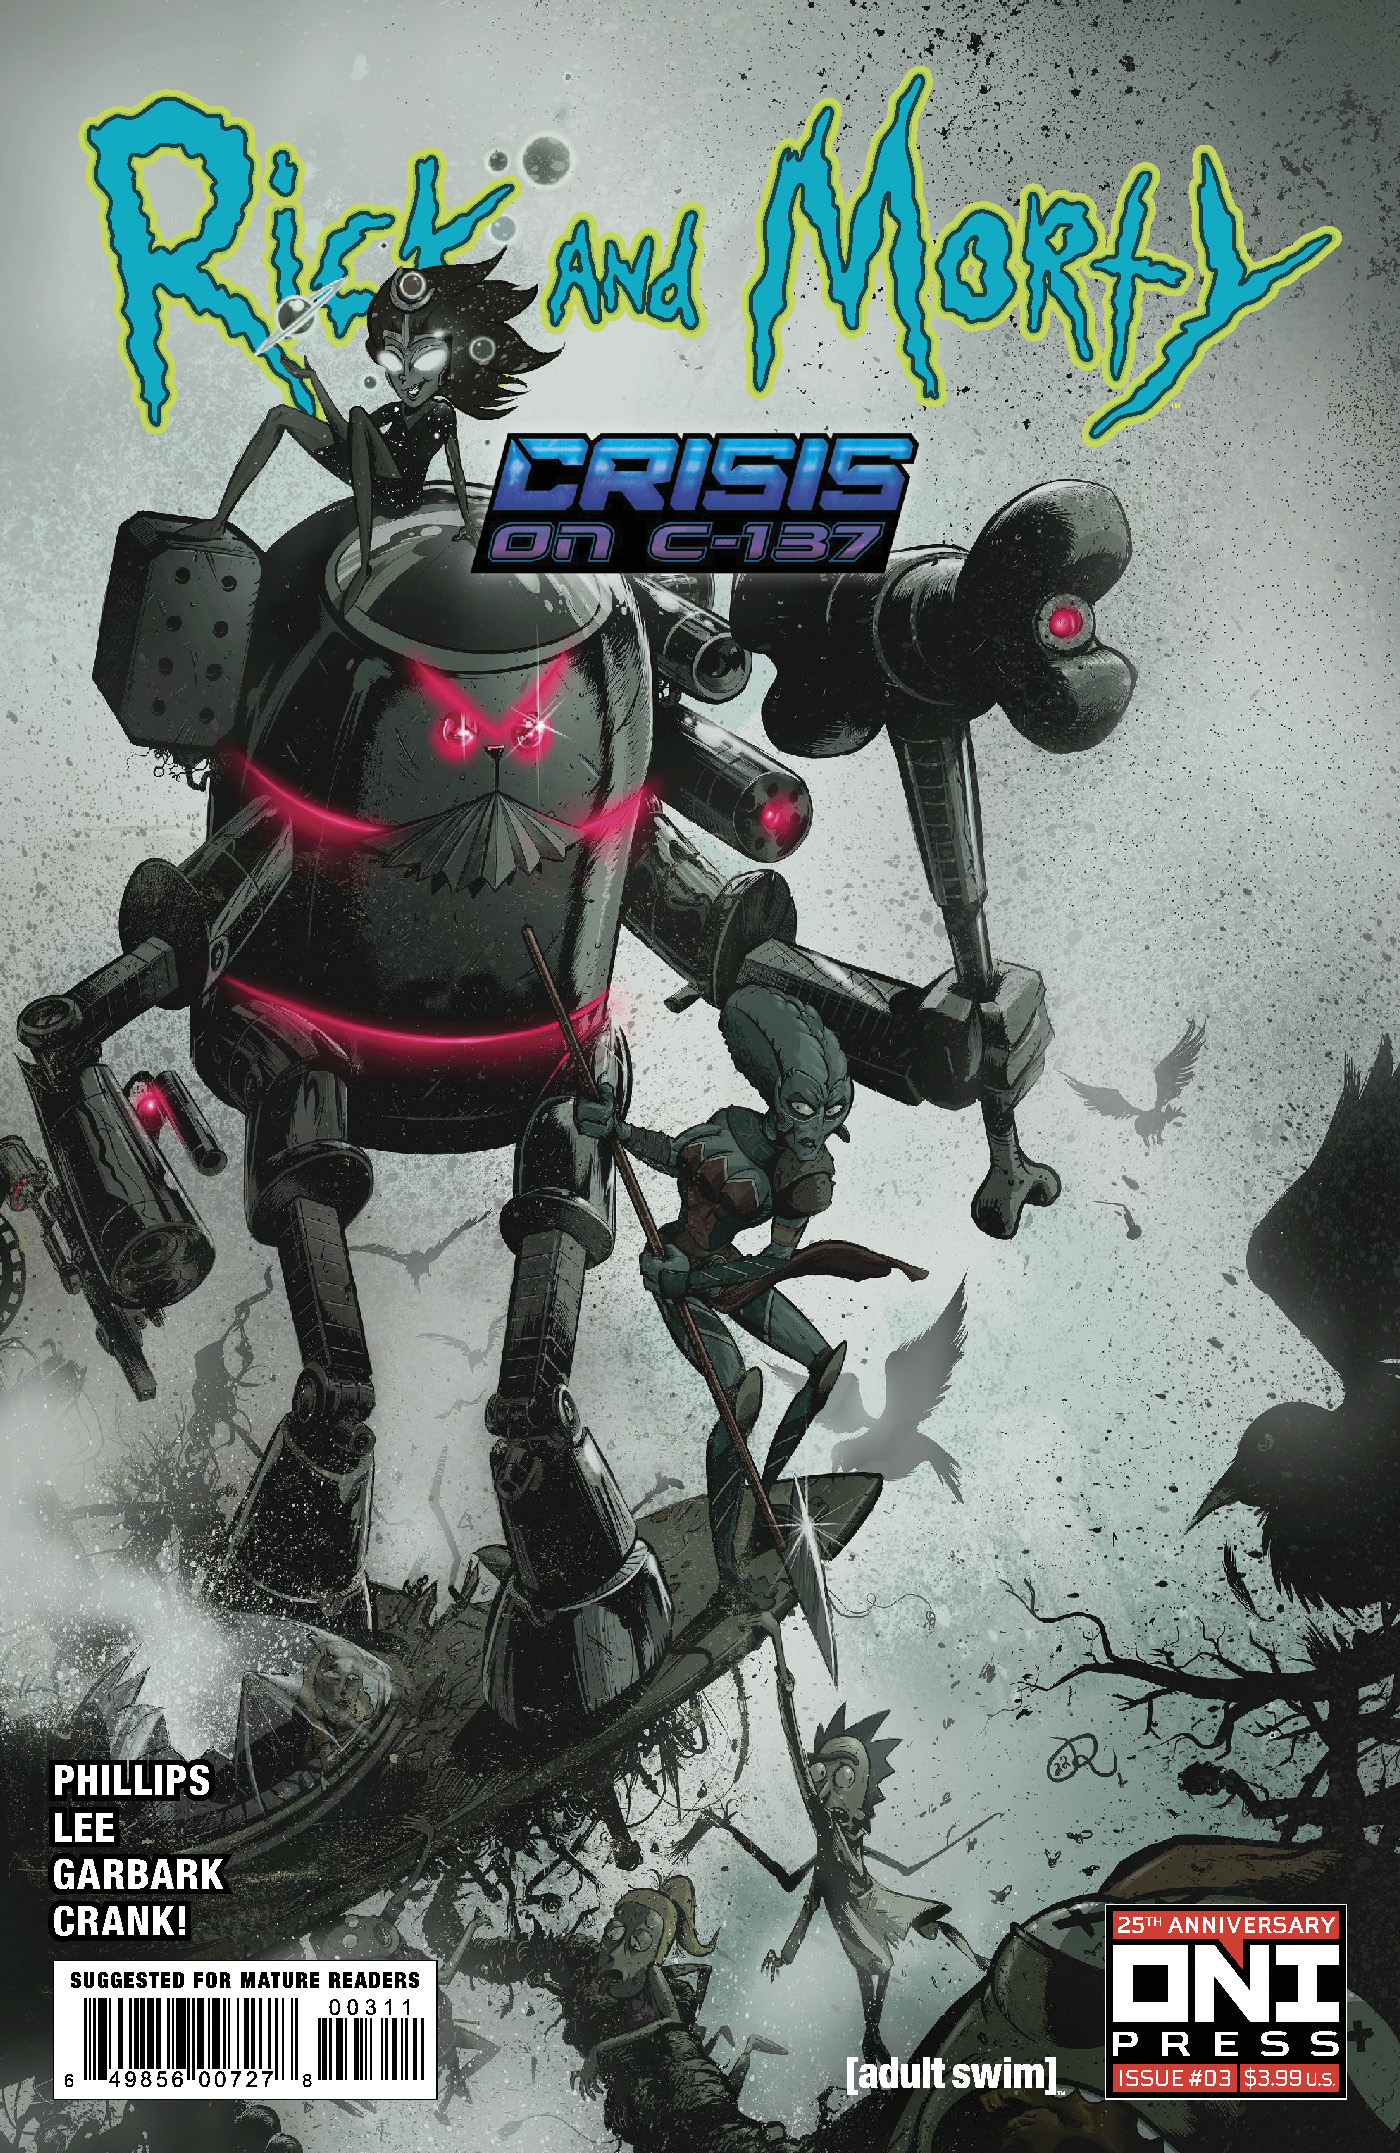 Rick and Morty Crisis On C 137 #3 Cover A Ryan Lee (Of 4)